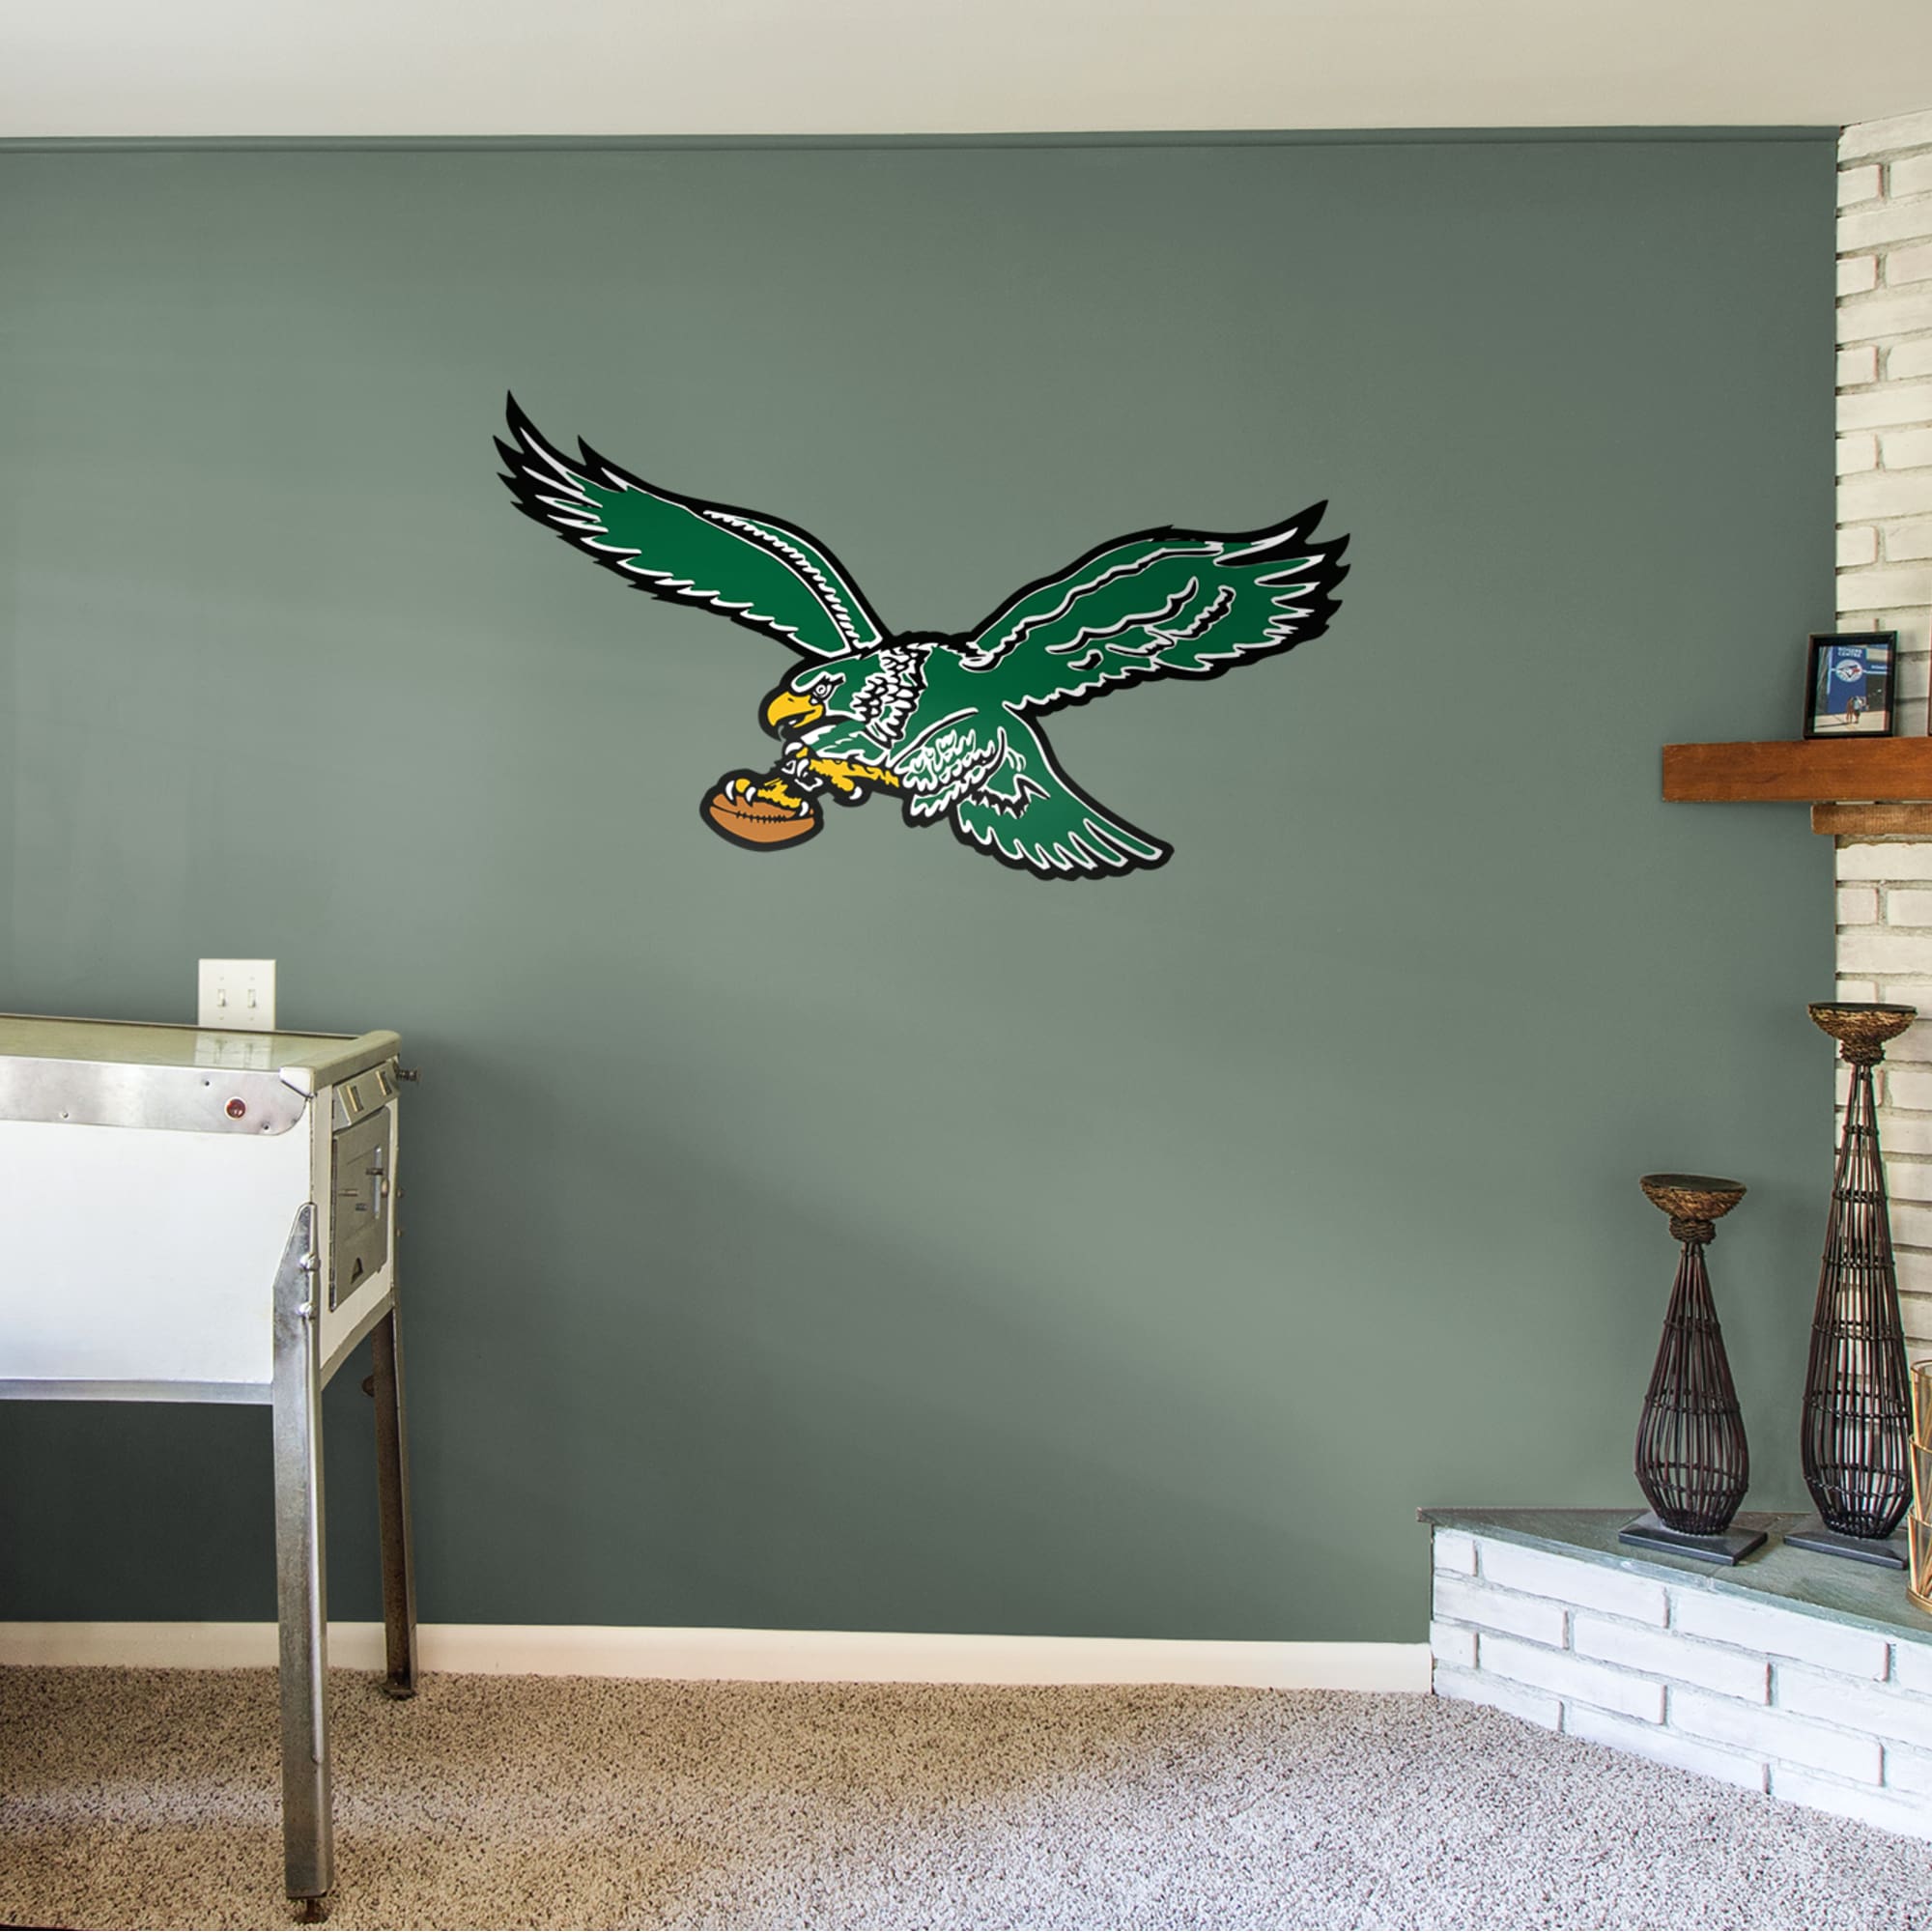 Philadelphia Eagles: Classic Logo - Officially Licensed NFL Removable Wall Decal Giant Logo (51"W x 30"H) by Fathead | Vinyl